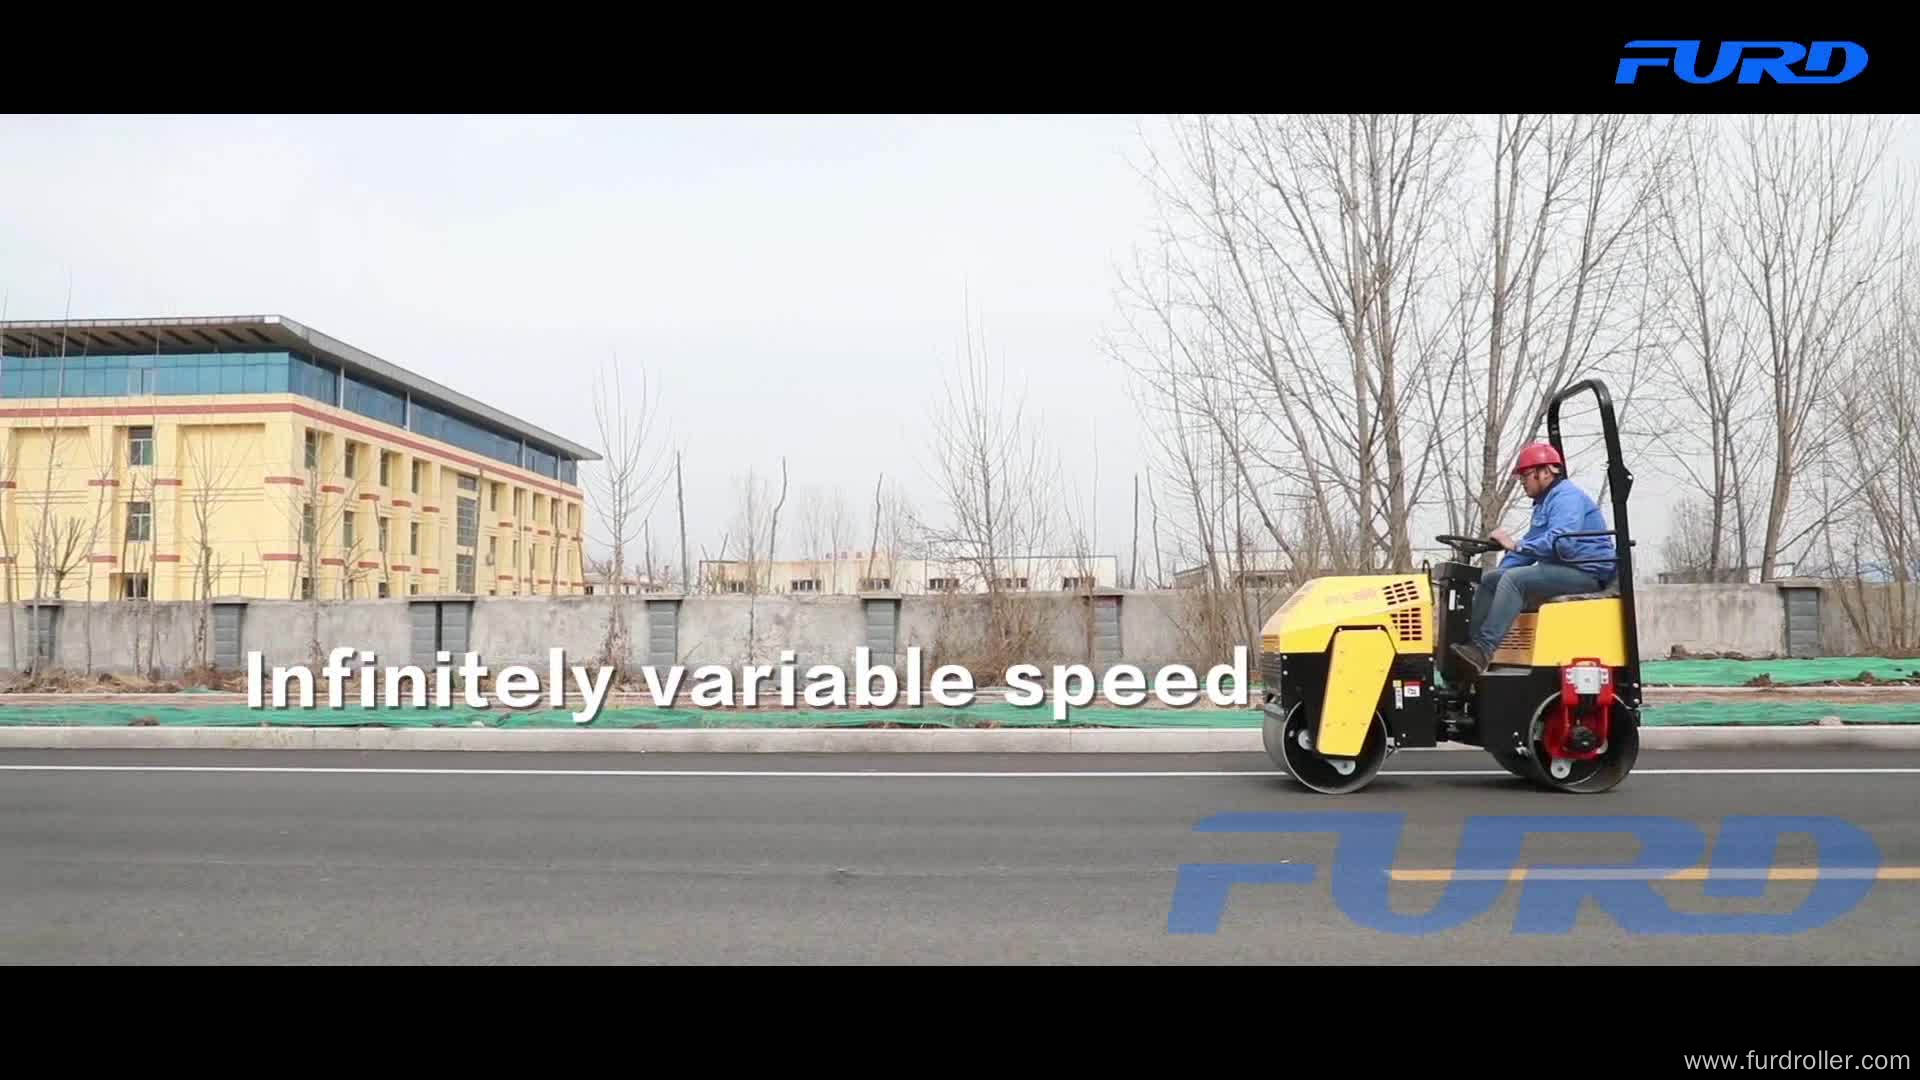 1 ton Weight Compactor Vibratory Roller for Road Construction